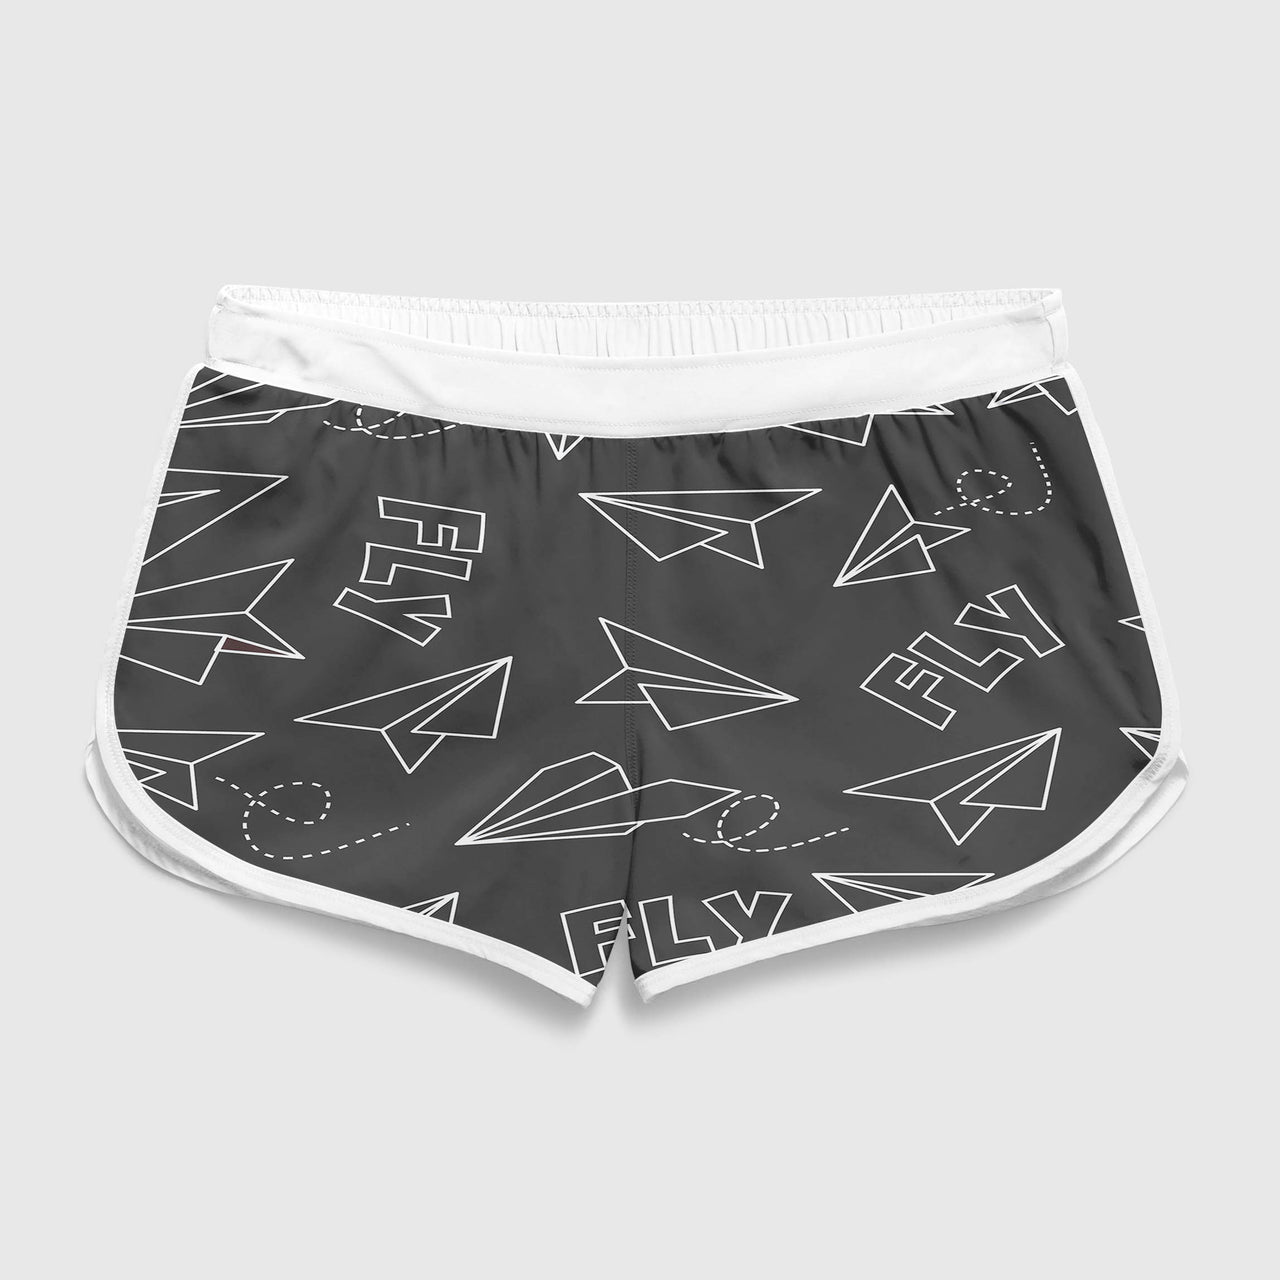 Paper Airplane & Fly (Gray) Designed Women Beach Style Shorts